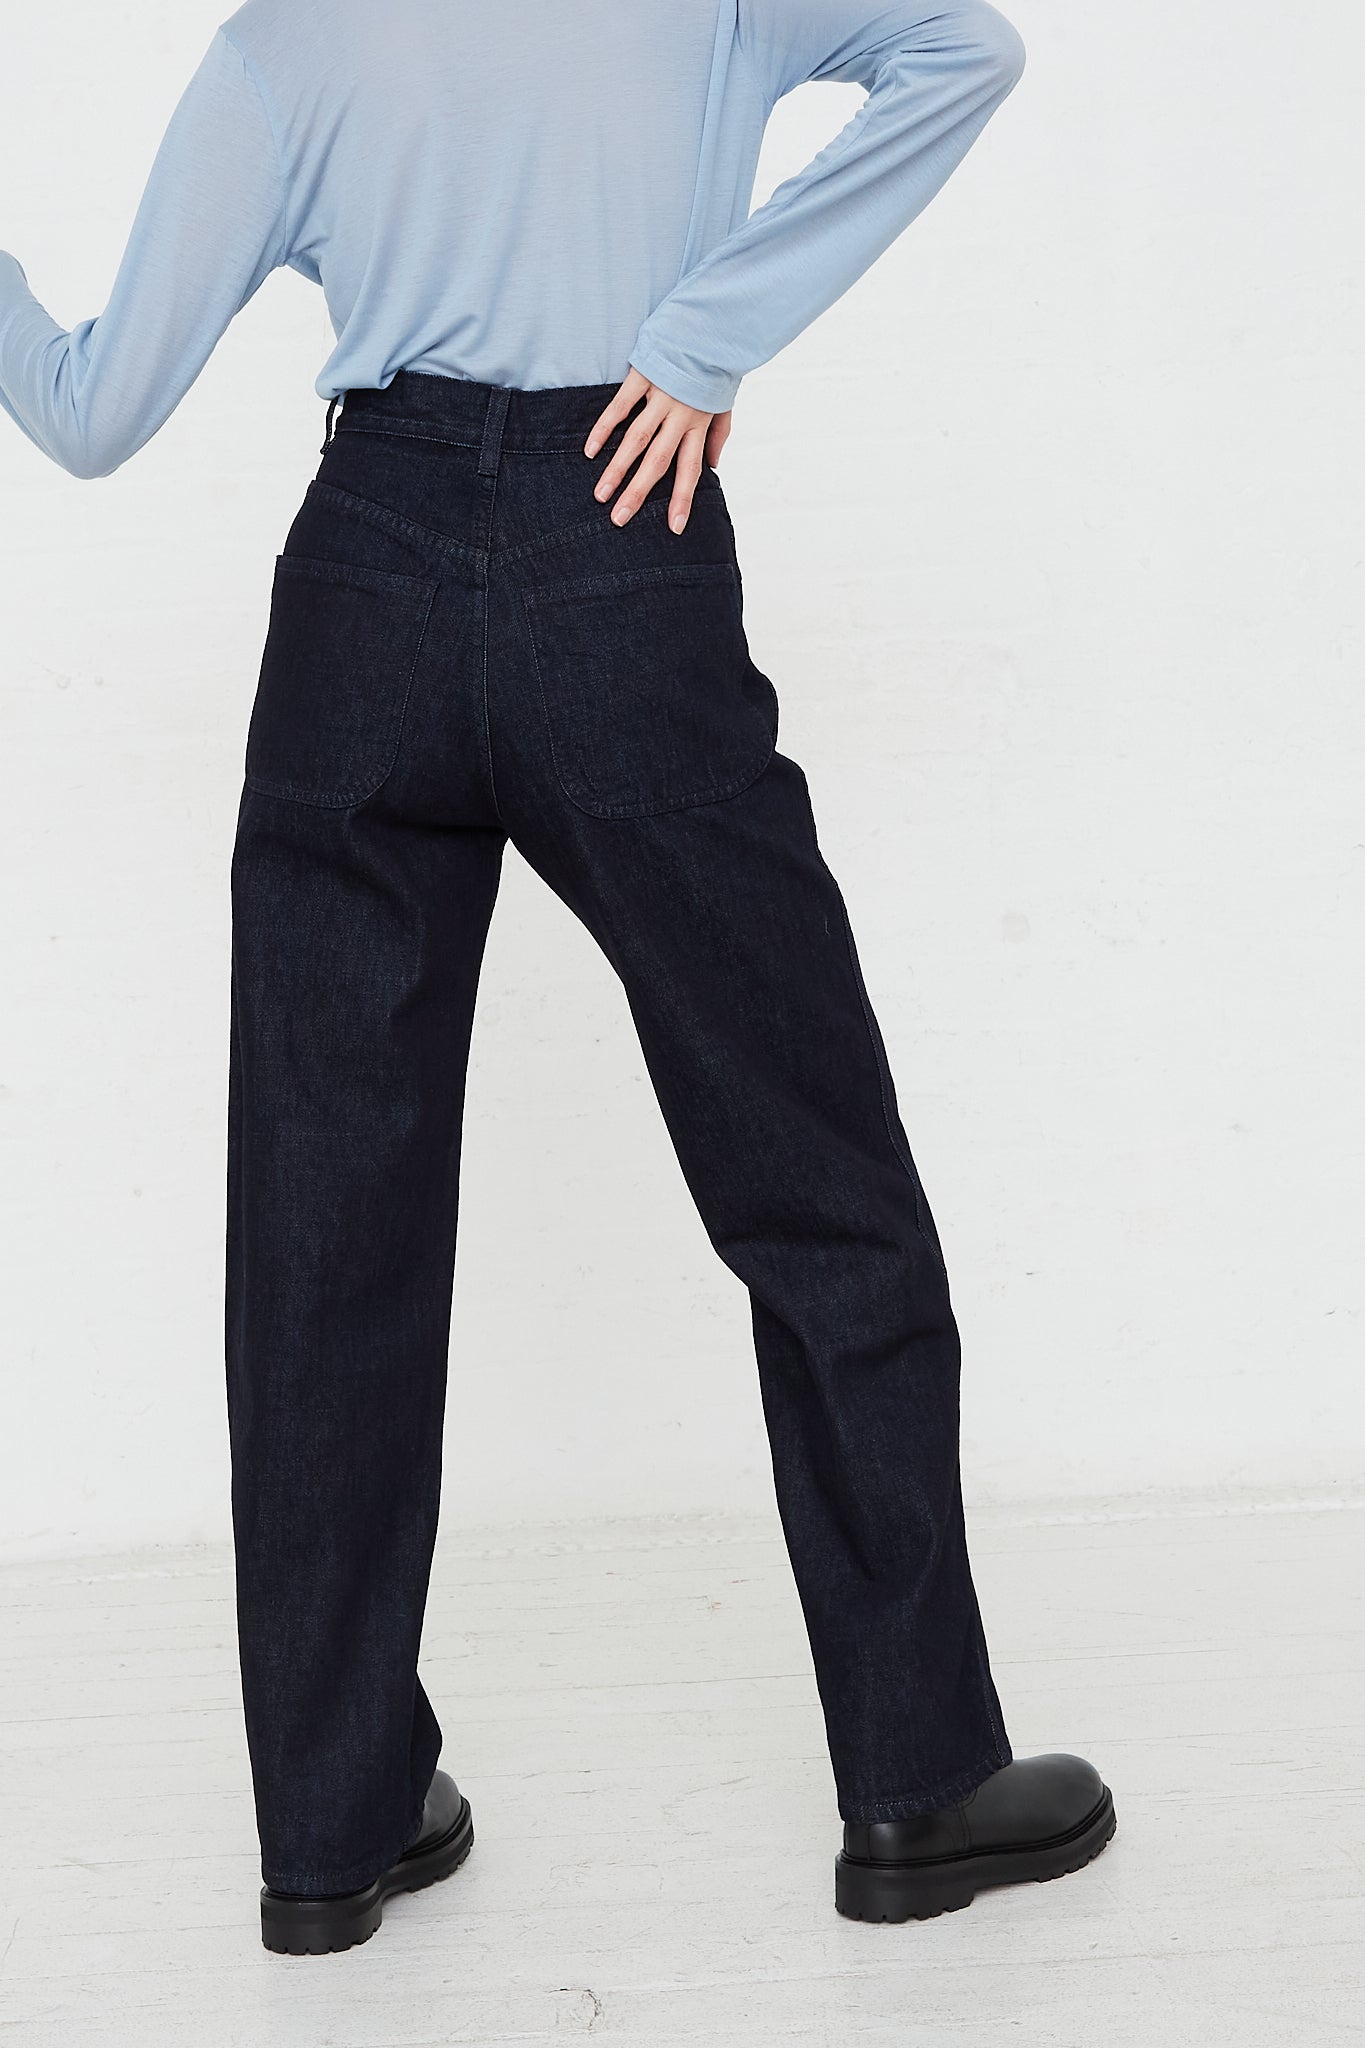 The 225 Slim Fit Pant in Japanese Denim by Jesse Kamm for Oroboro Back